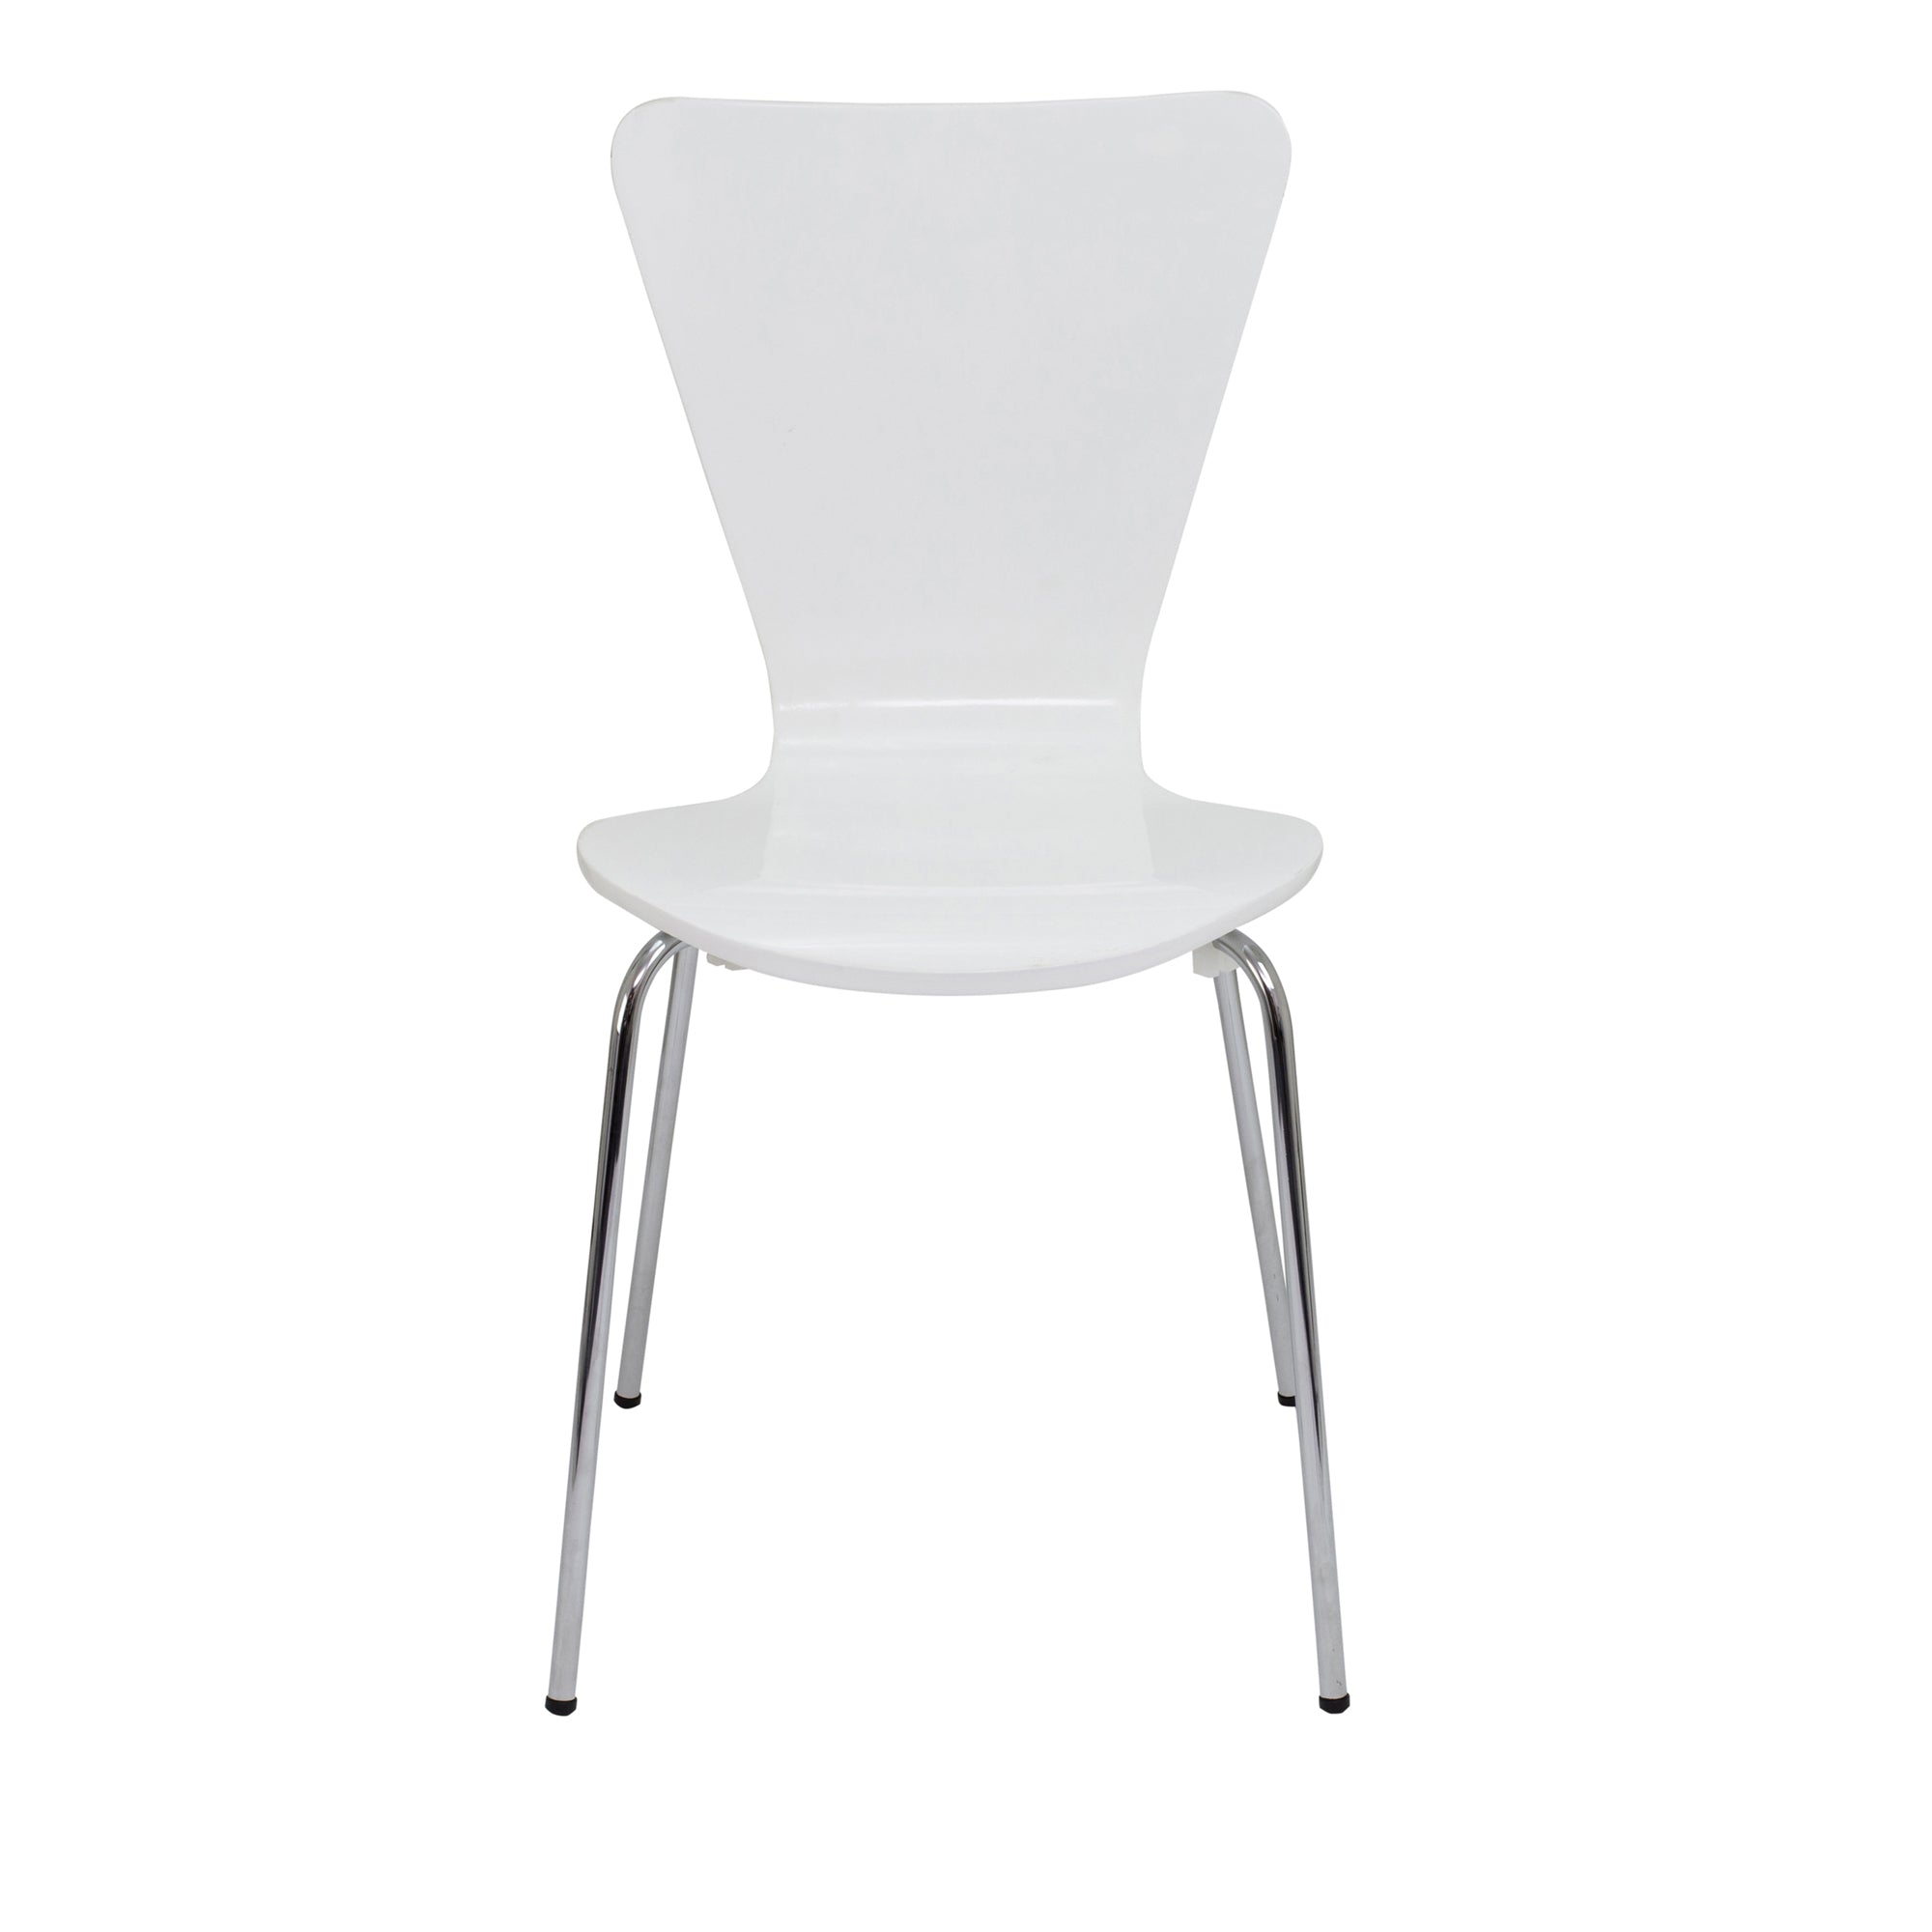 Picasso Heavy Duty Visitor Chair